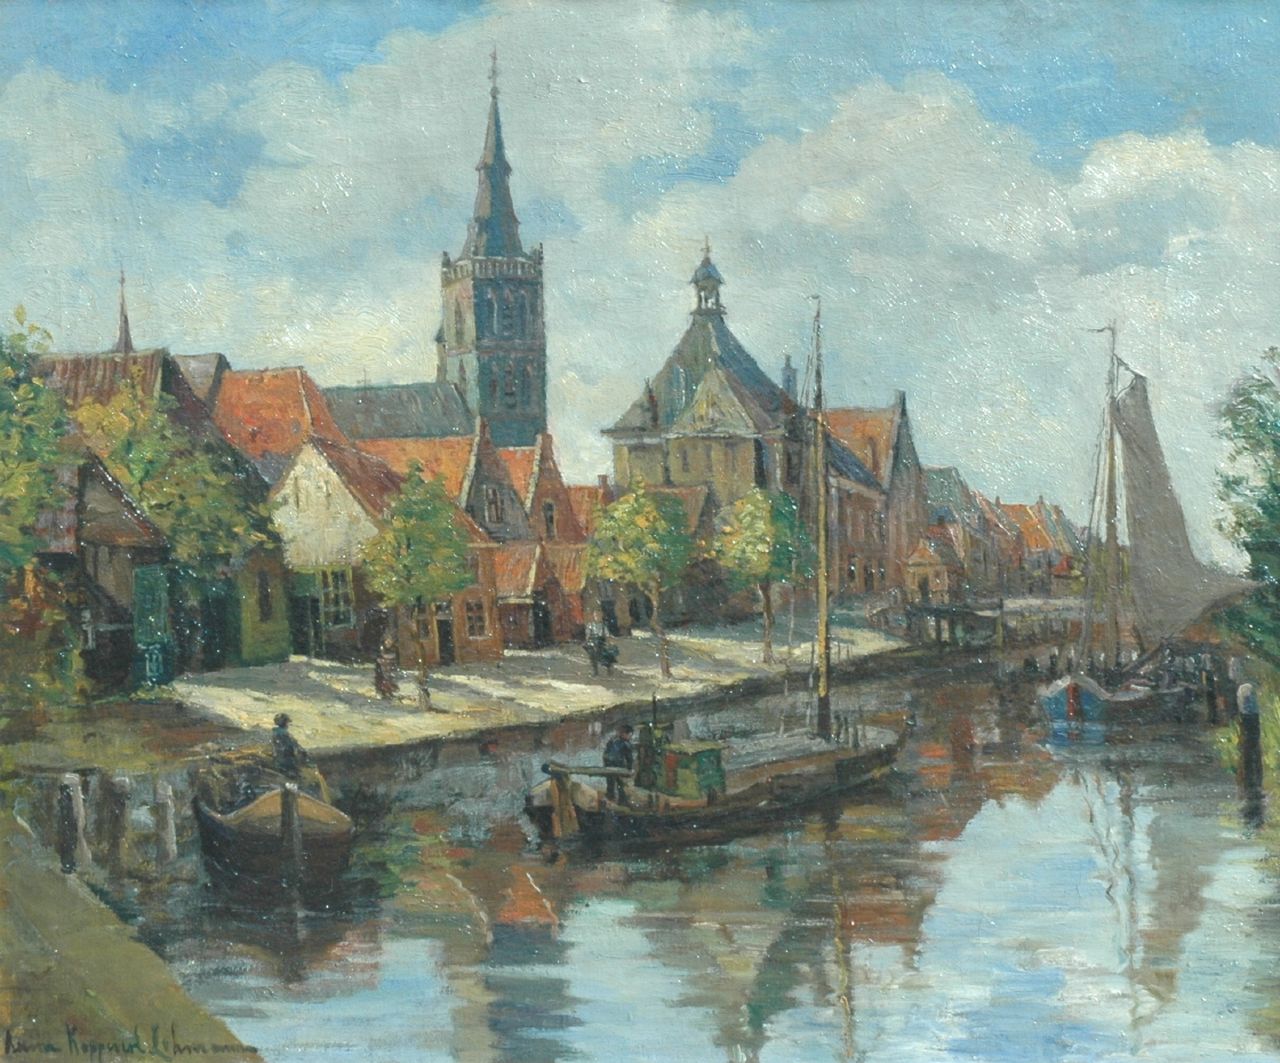 Lehmann A.E.F.  | 'Anna' Elisabeth Frederika Lehmann, The harbour of Oudewater, oil on canvas 50.2 x 60.4 cm, signed l.l. and painted circa 1927